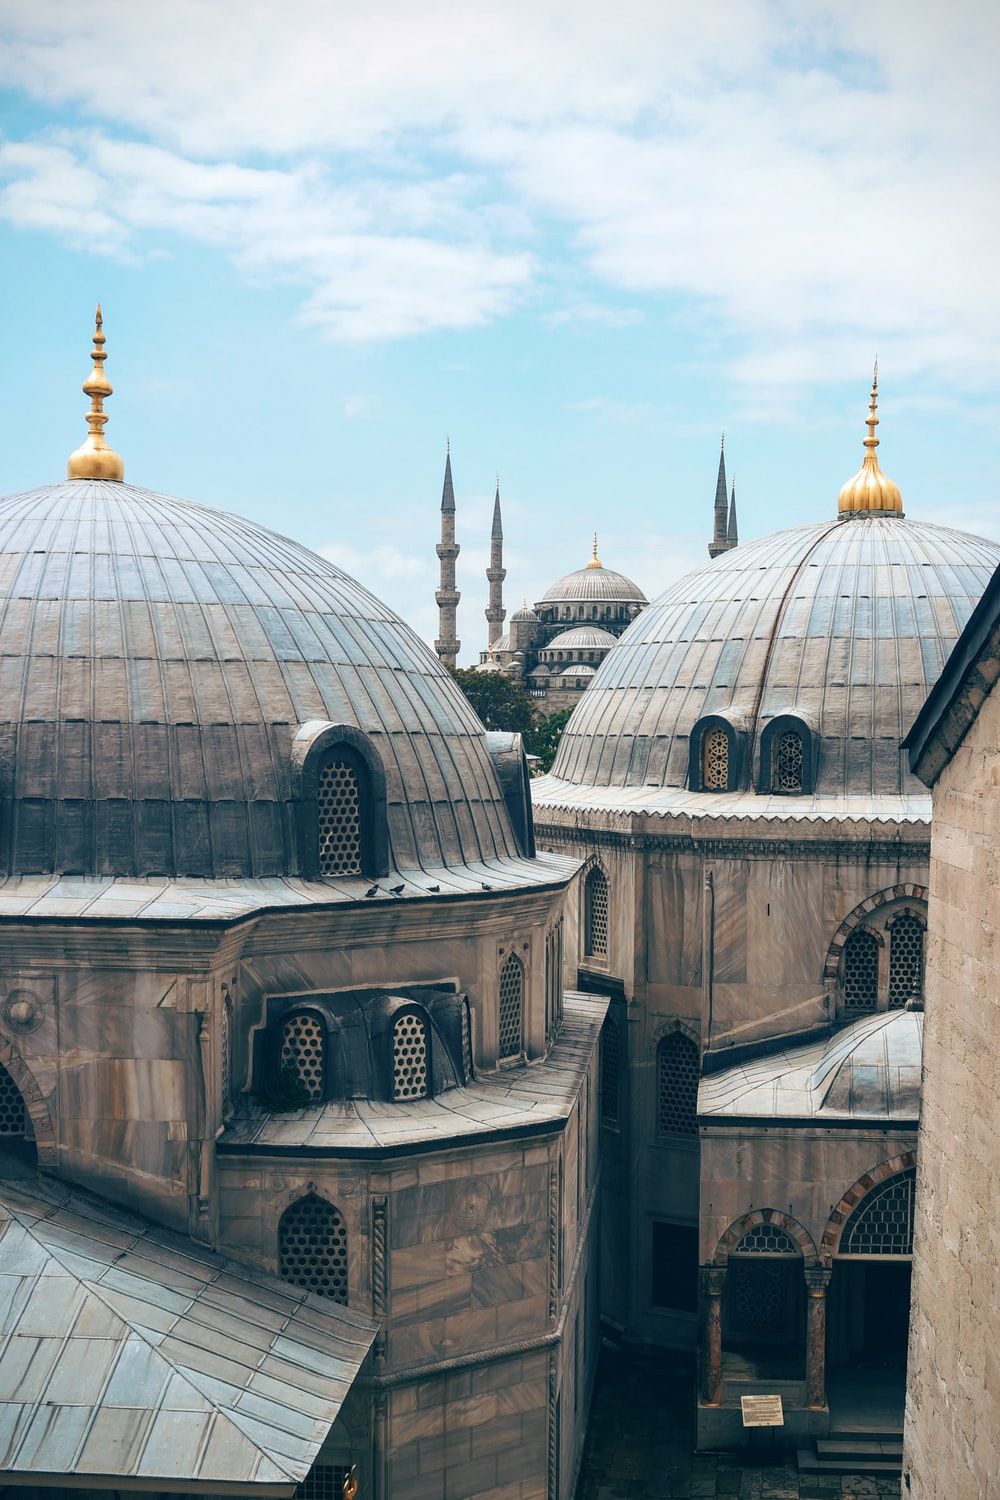 Blue Mosque Picture. Download Free Image